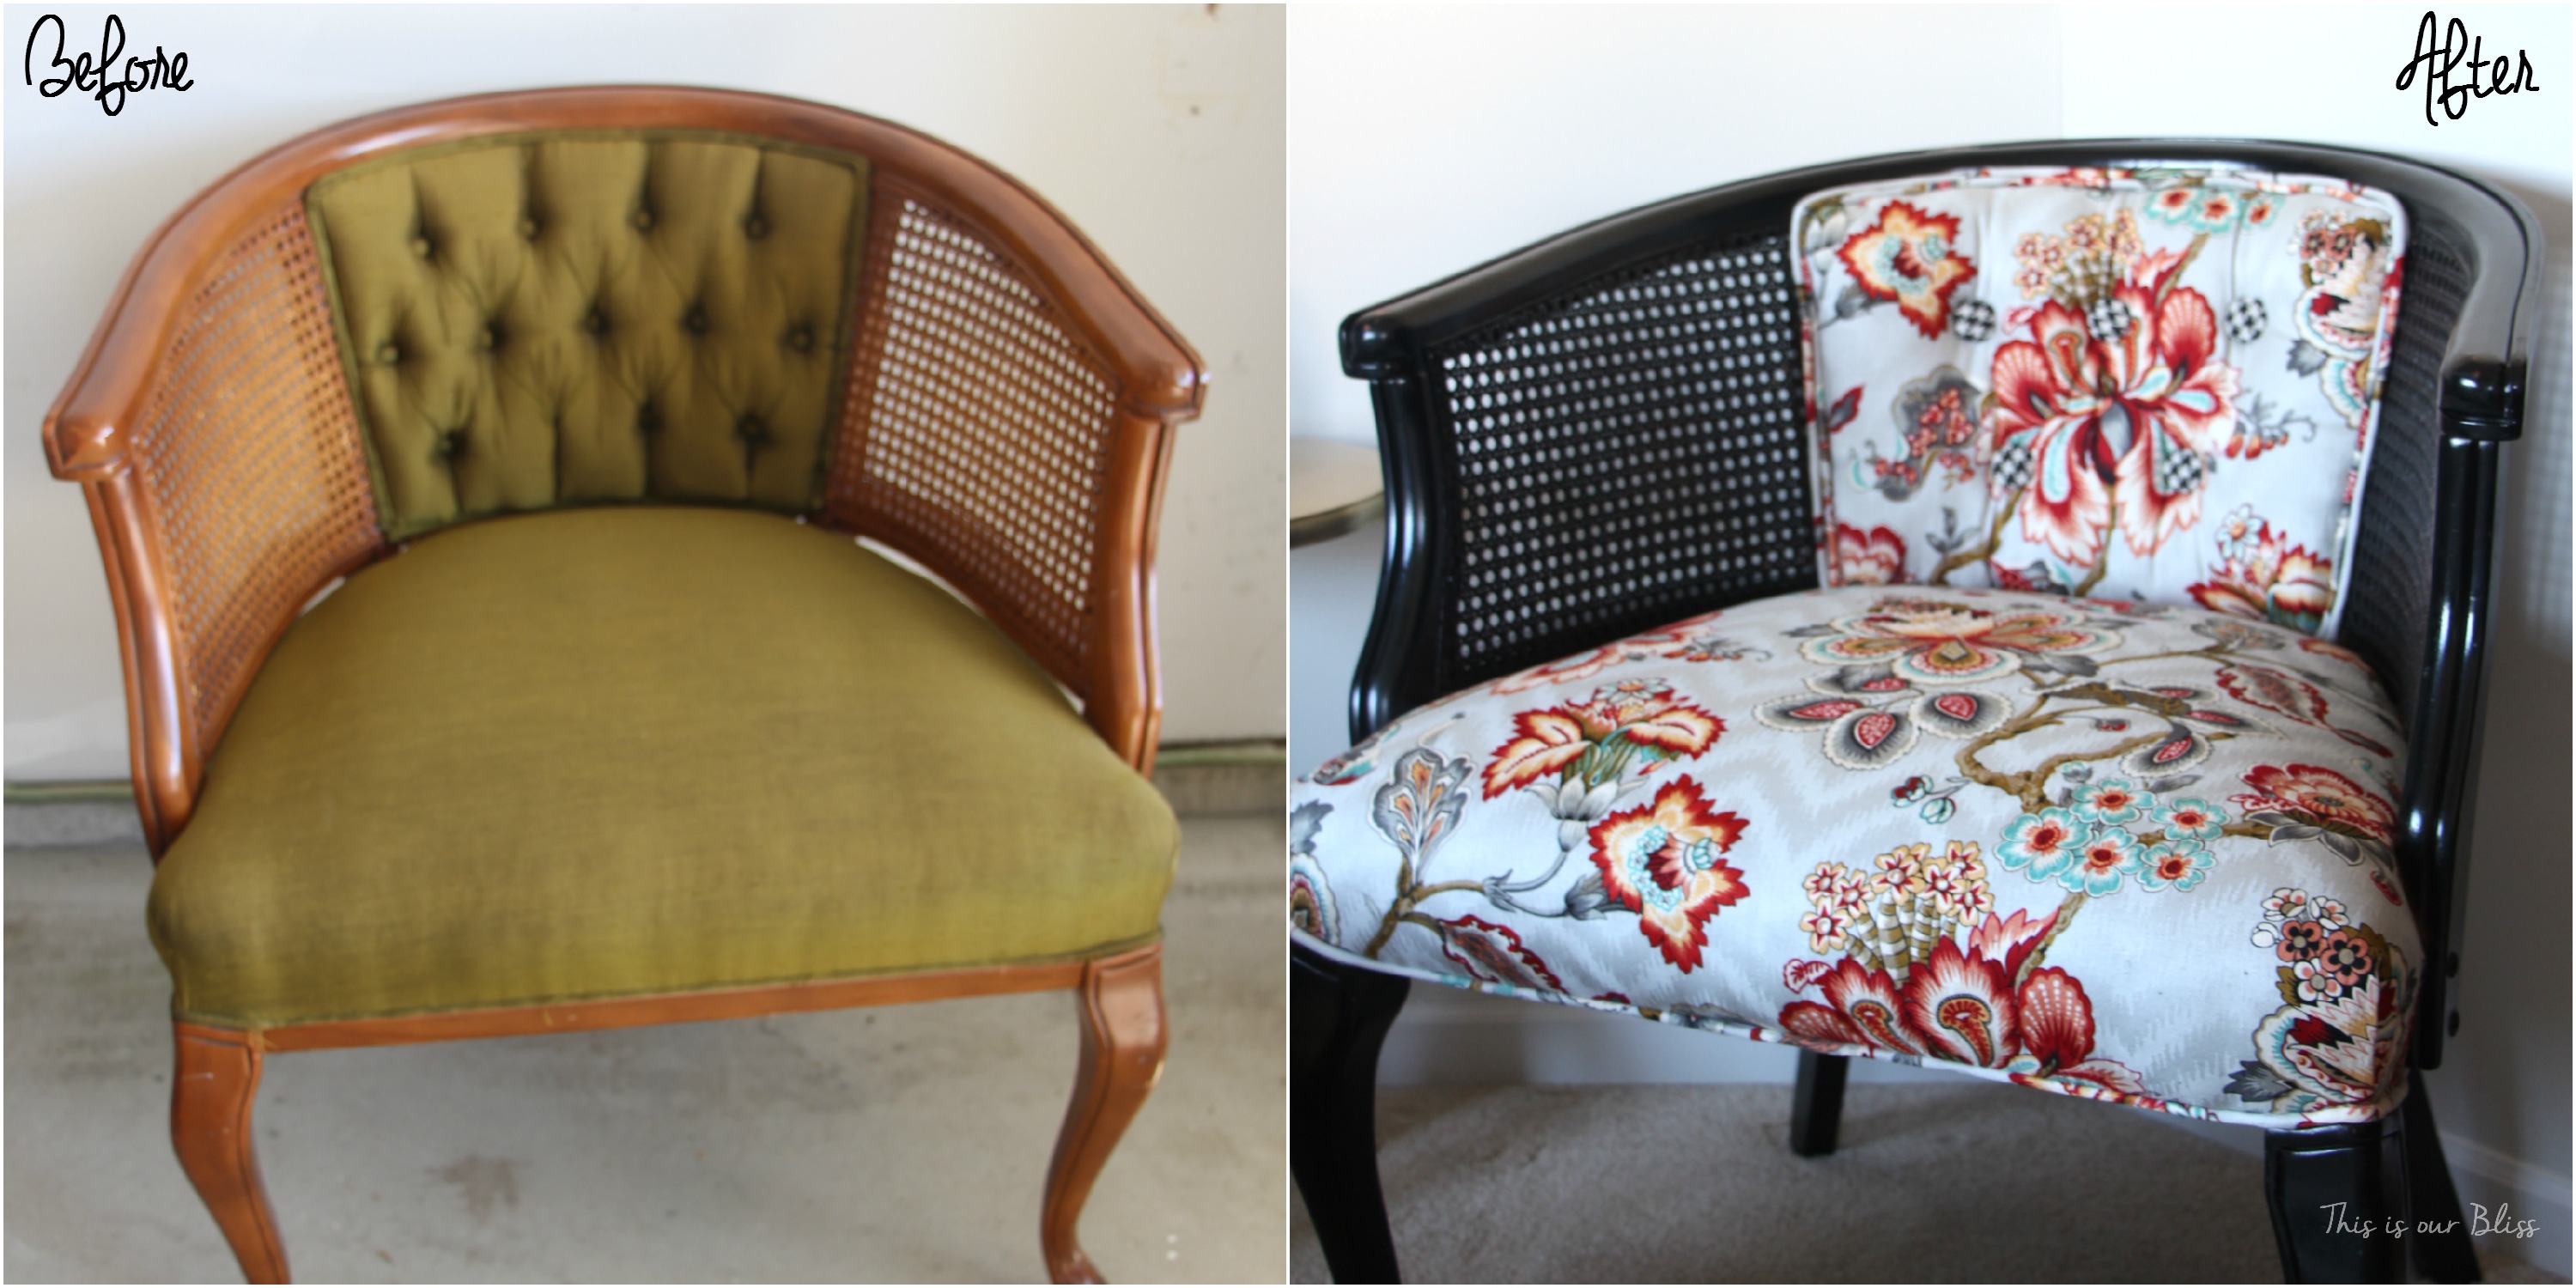 floral and houndstooth cane chair makeover - HGTV fabric - This is our Bliss - before and after